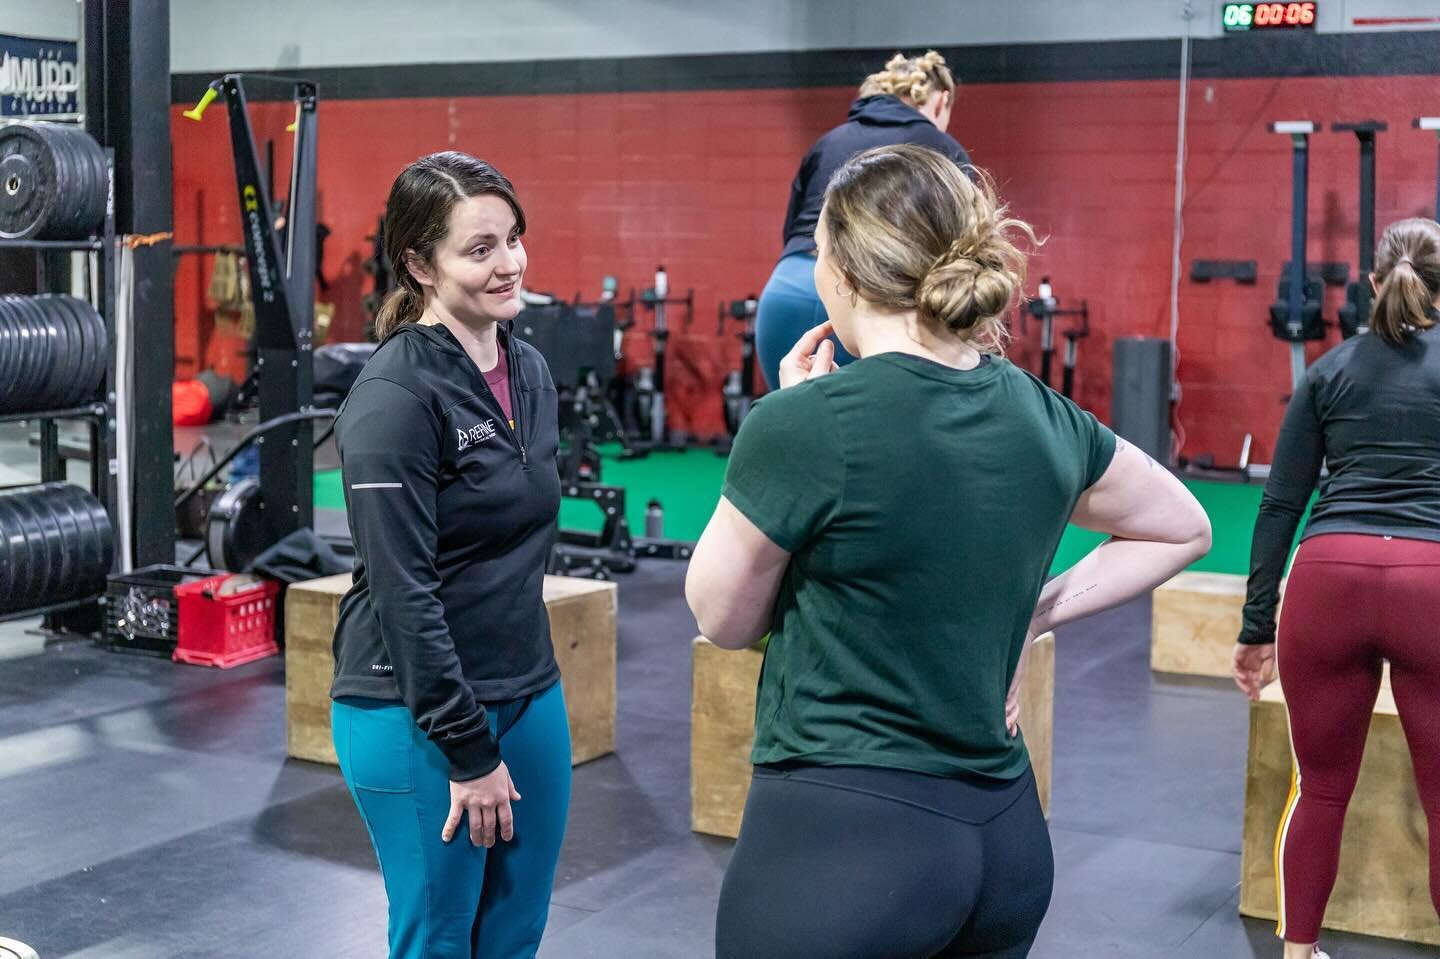 Pain is not a requirement of pregnancy! We can manage pain through movement, physical therapy, and chiropractic care.  I partner with @women.can.jump for pelvic floor PT , @amycurrytraining athletic trainer, and @truenorthchirome21 chiropractic.  Tog